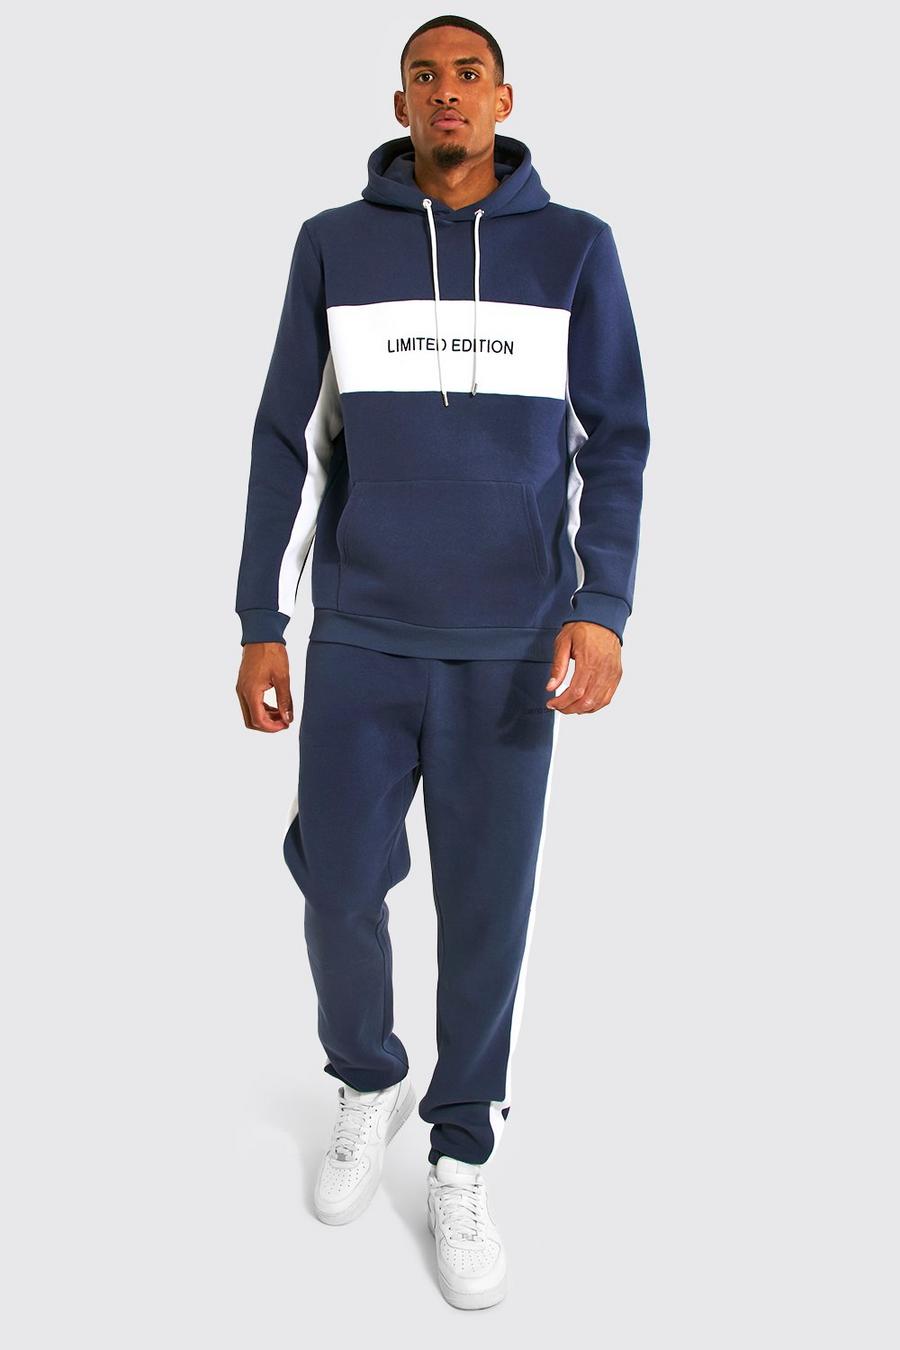 Navy Tall Limited Edition Colour Block Hooded Tracksuit